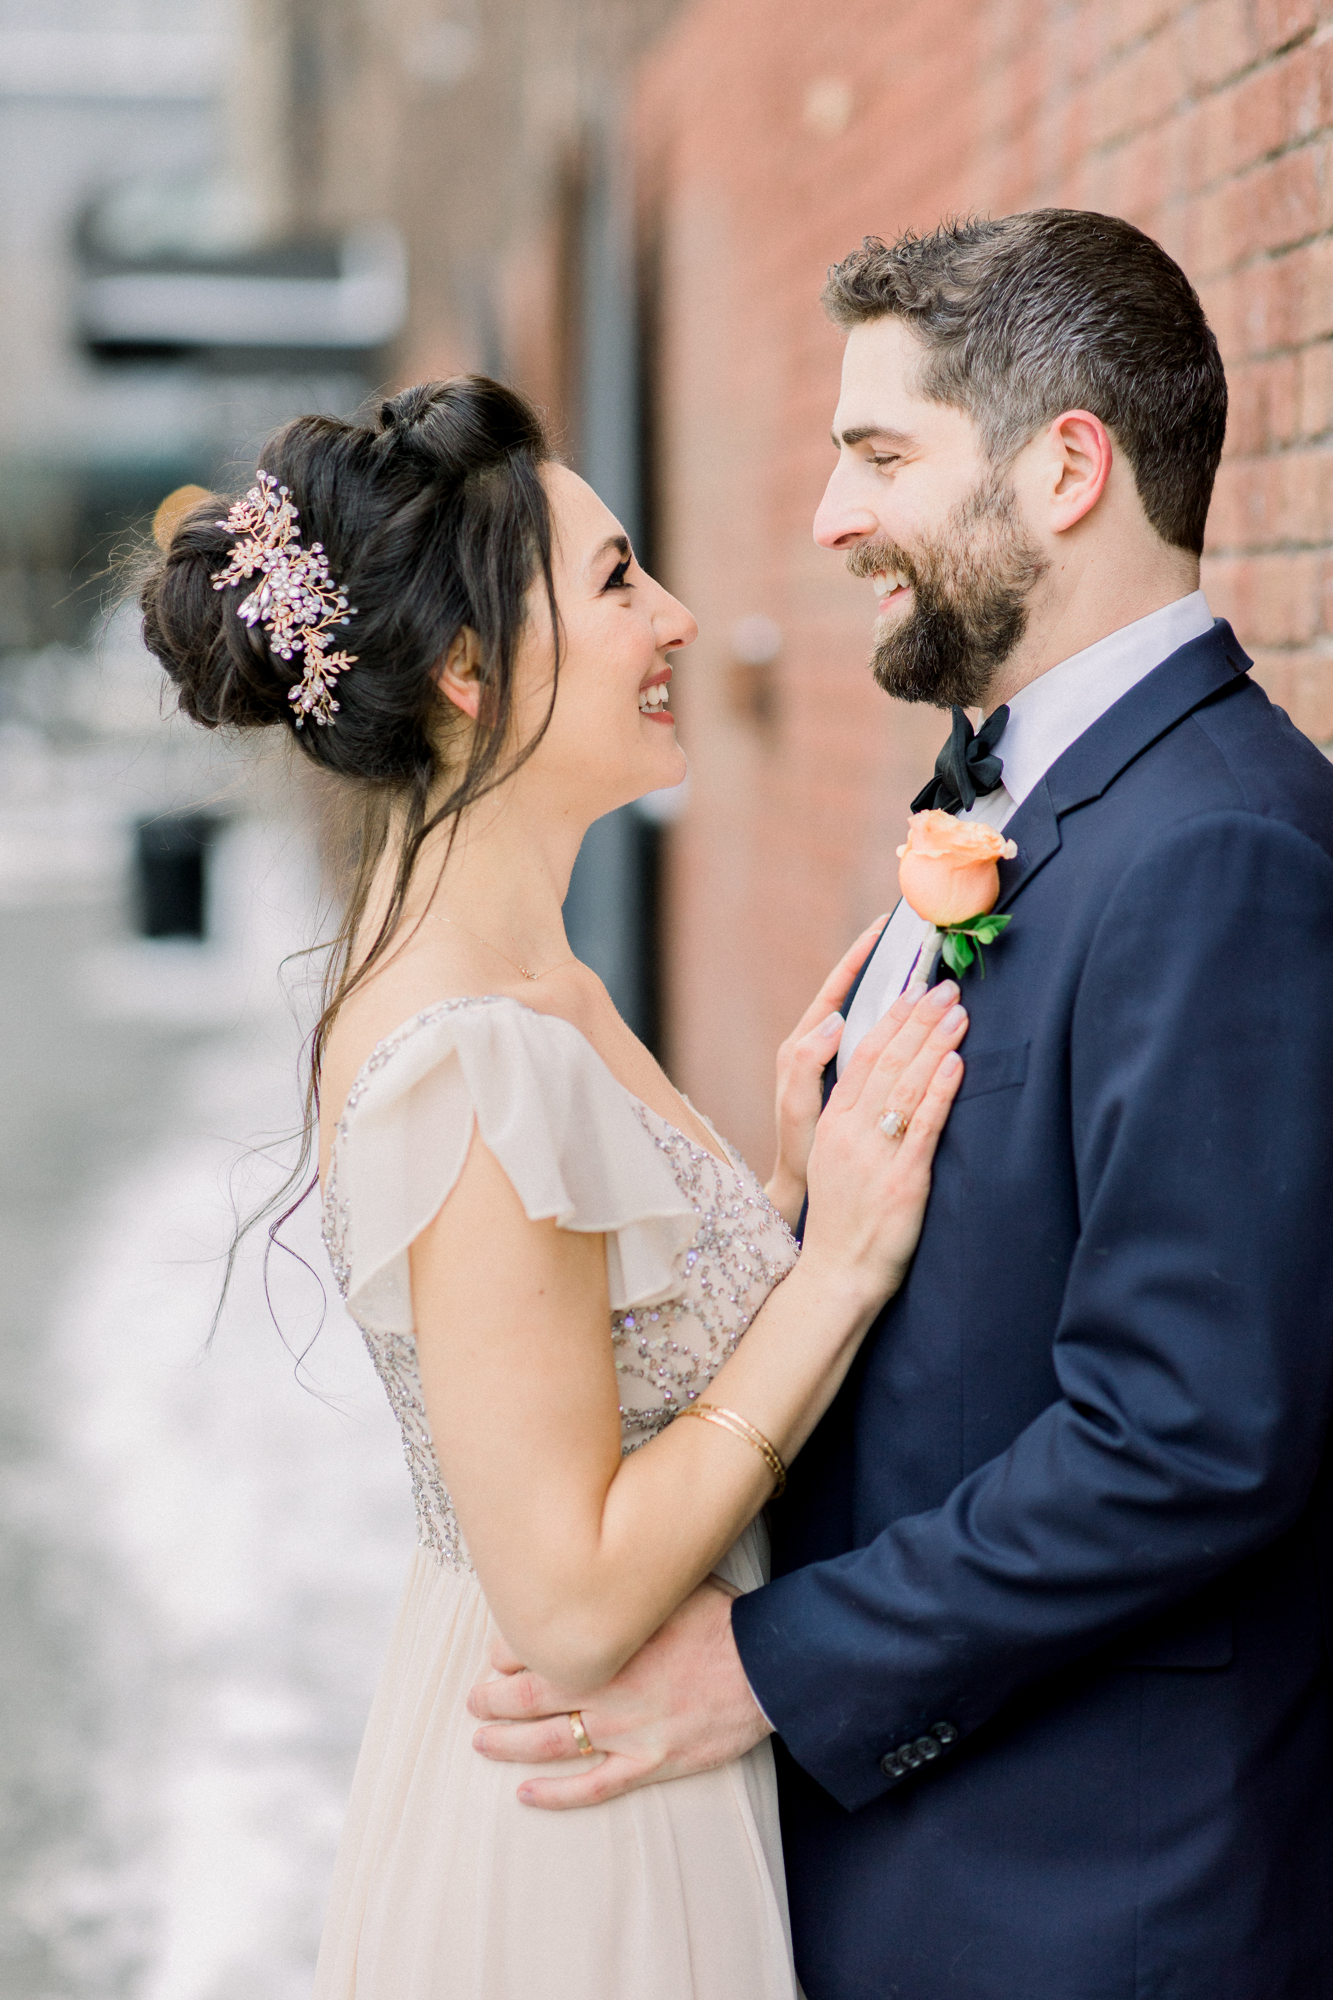 Fun and candid NYC wedding photographer and videographer